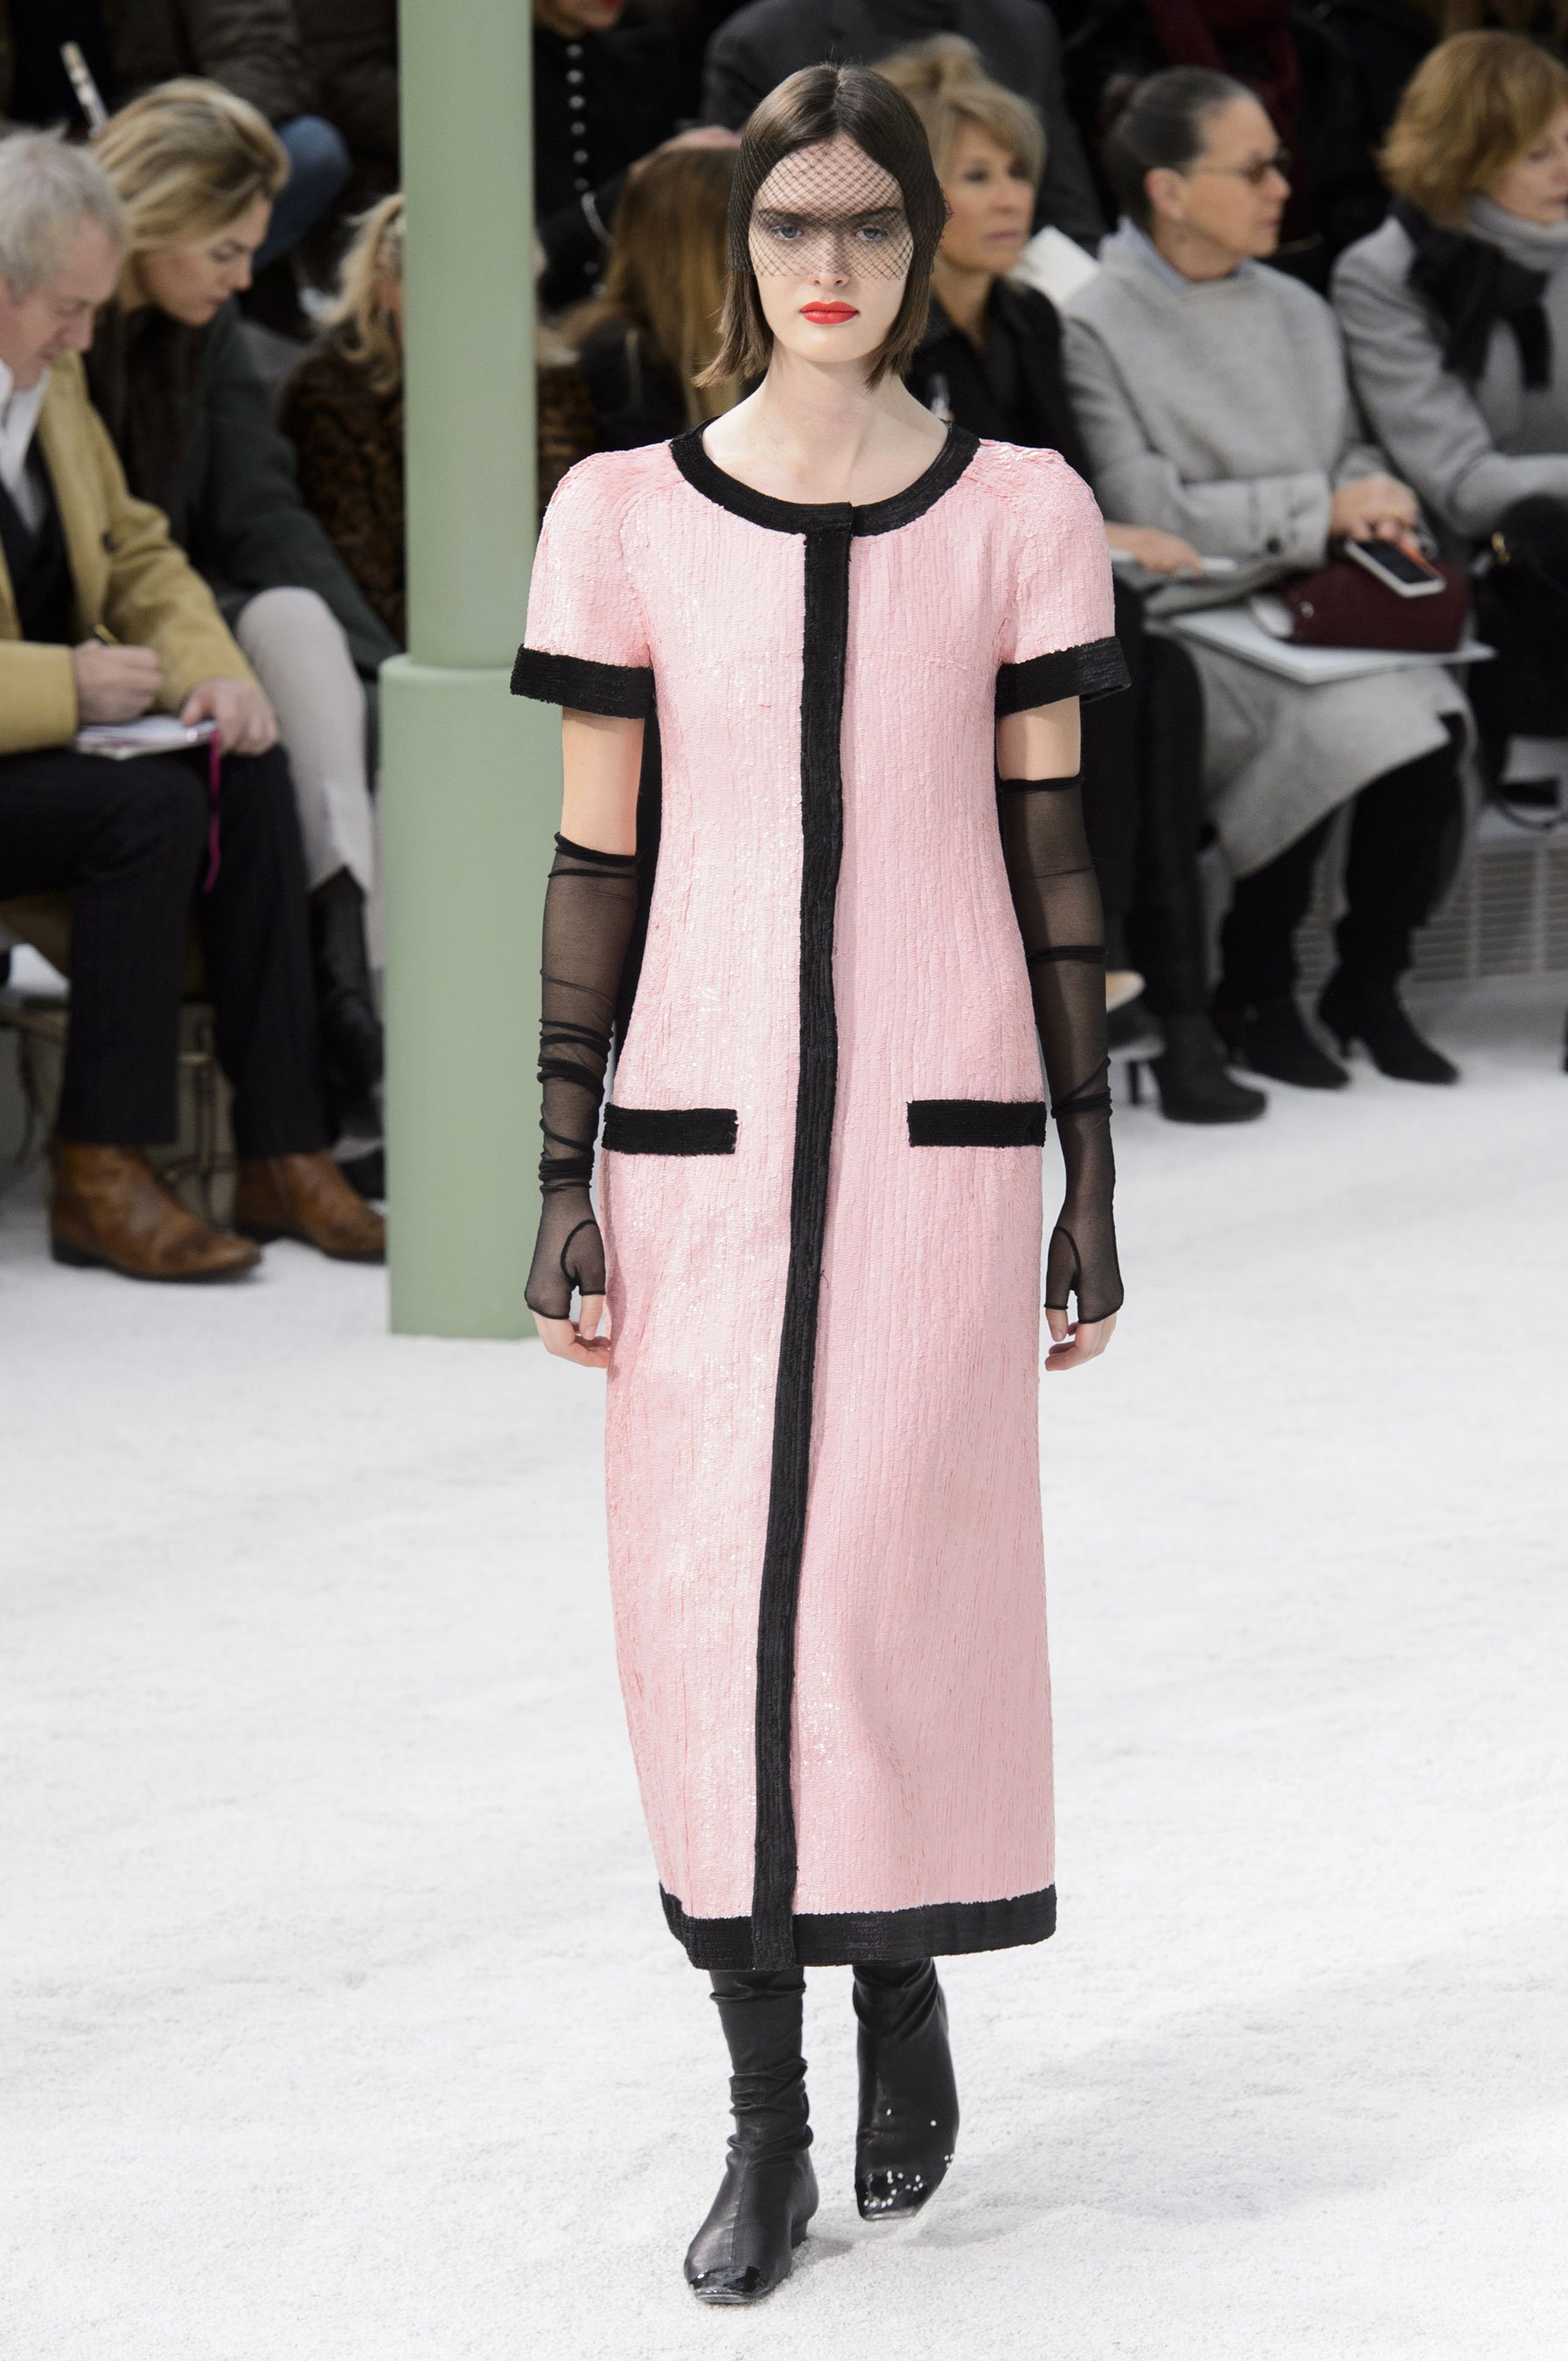 chanel haute couture spring 2015 pfw 56 sam